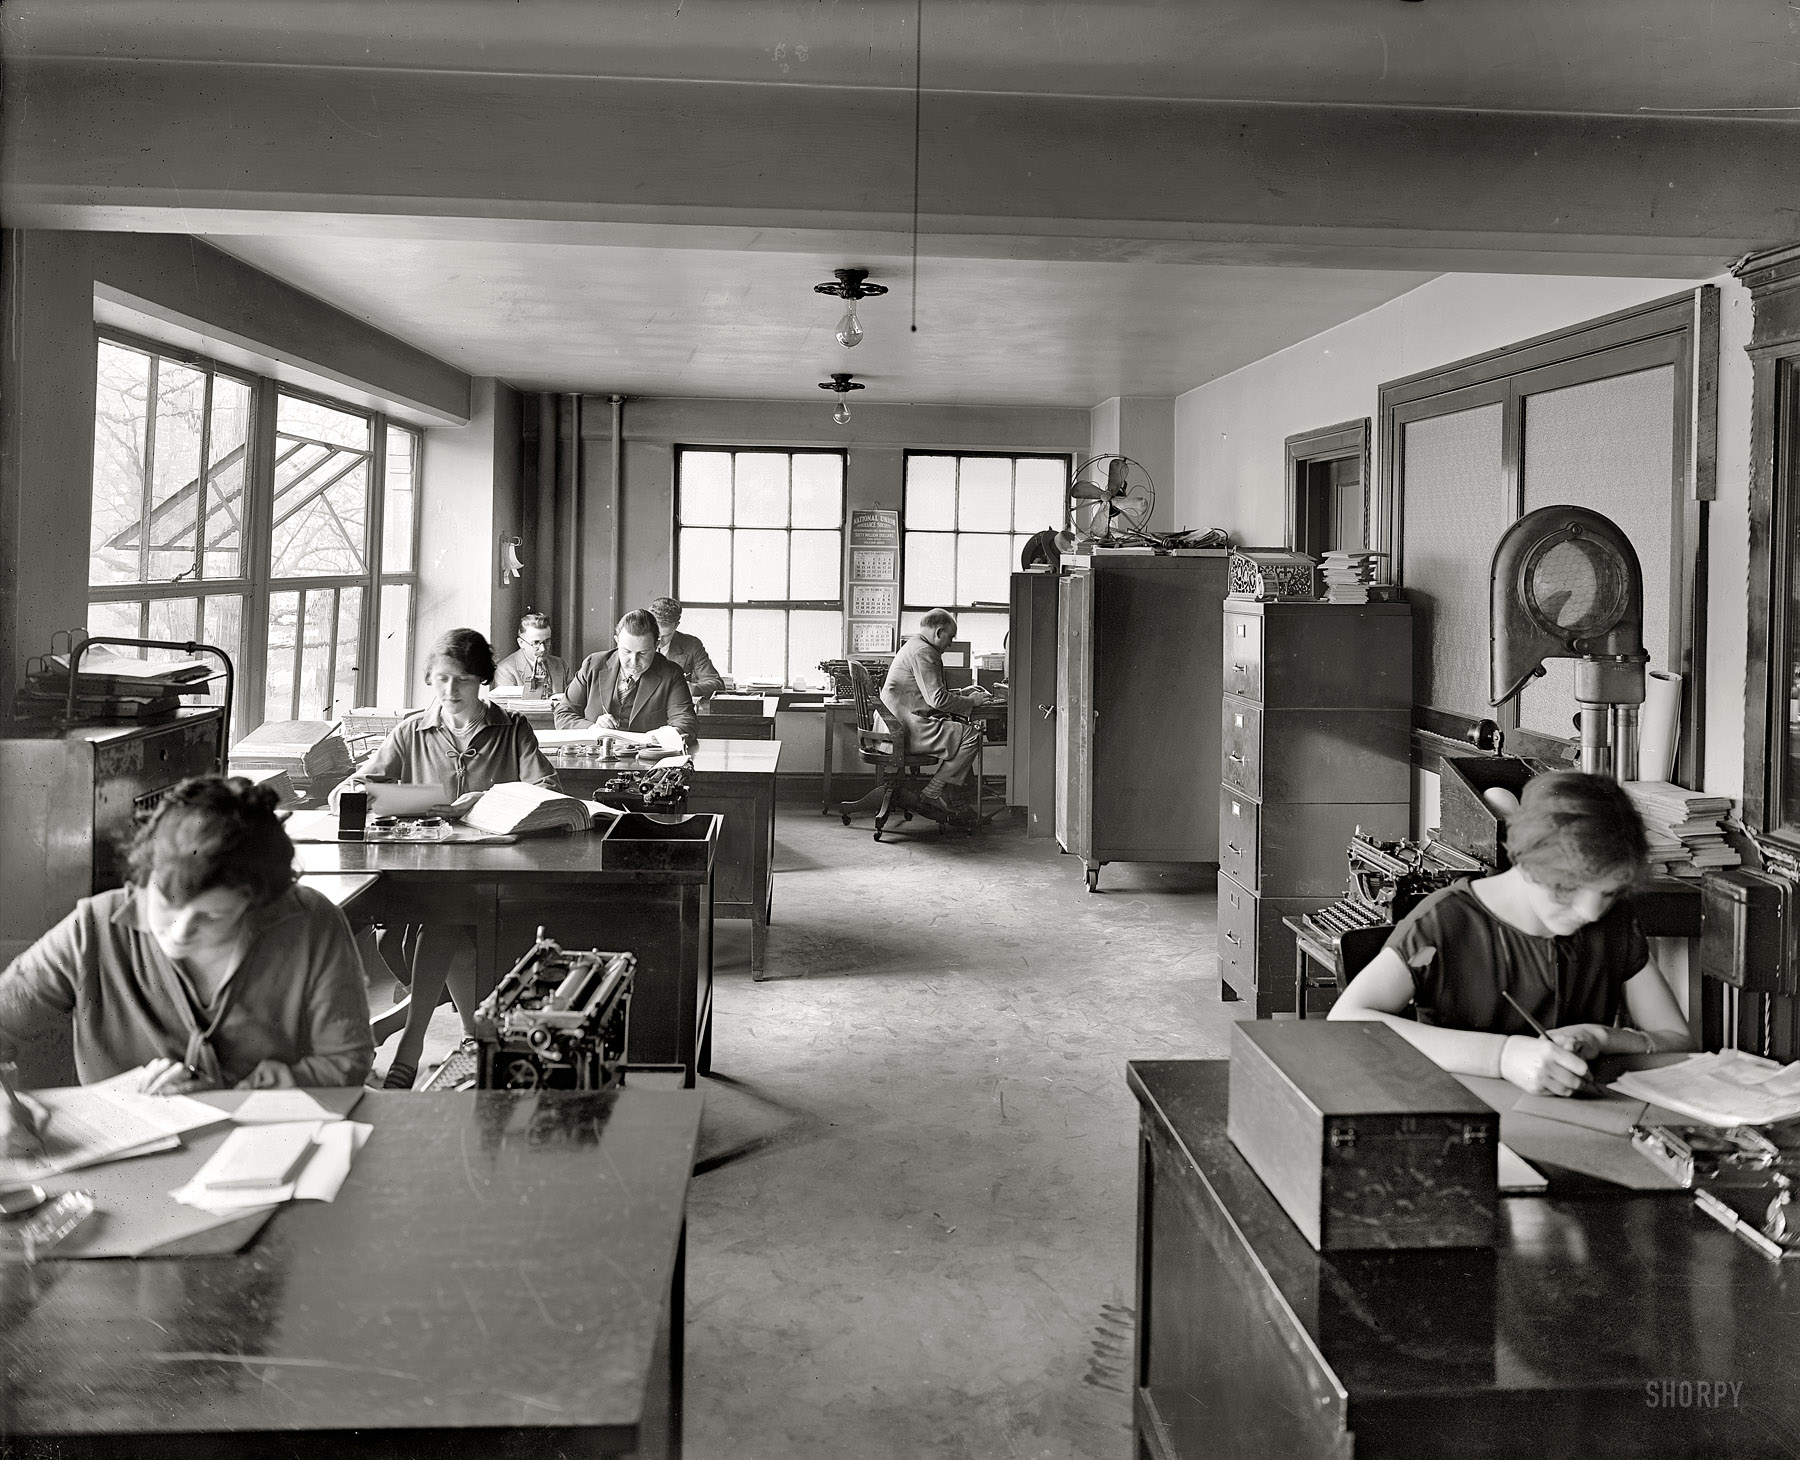 Washington, D.C., 1926. "Joseph McReynolds -- National Publishing Co." Back office at the McReynolds auto parts and sales business. View full size.